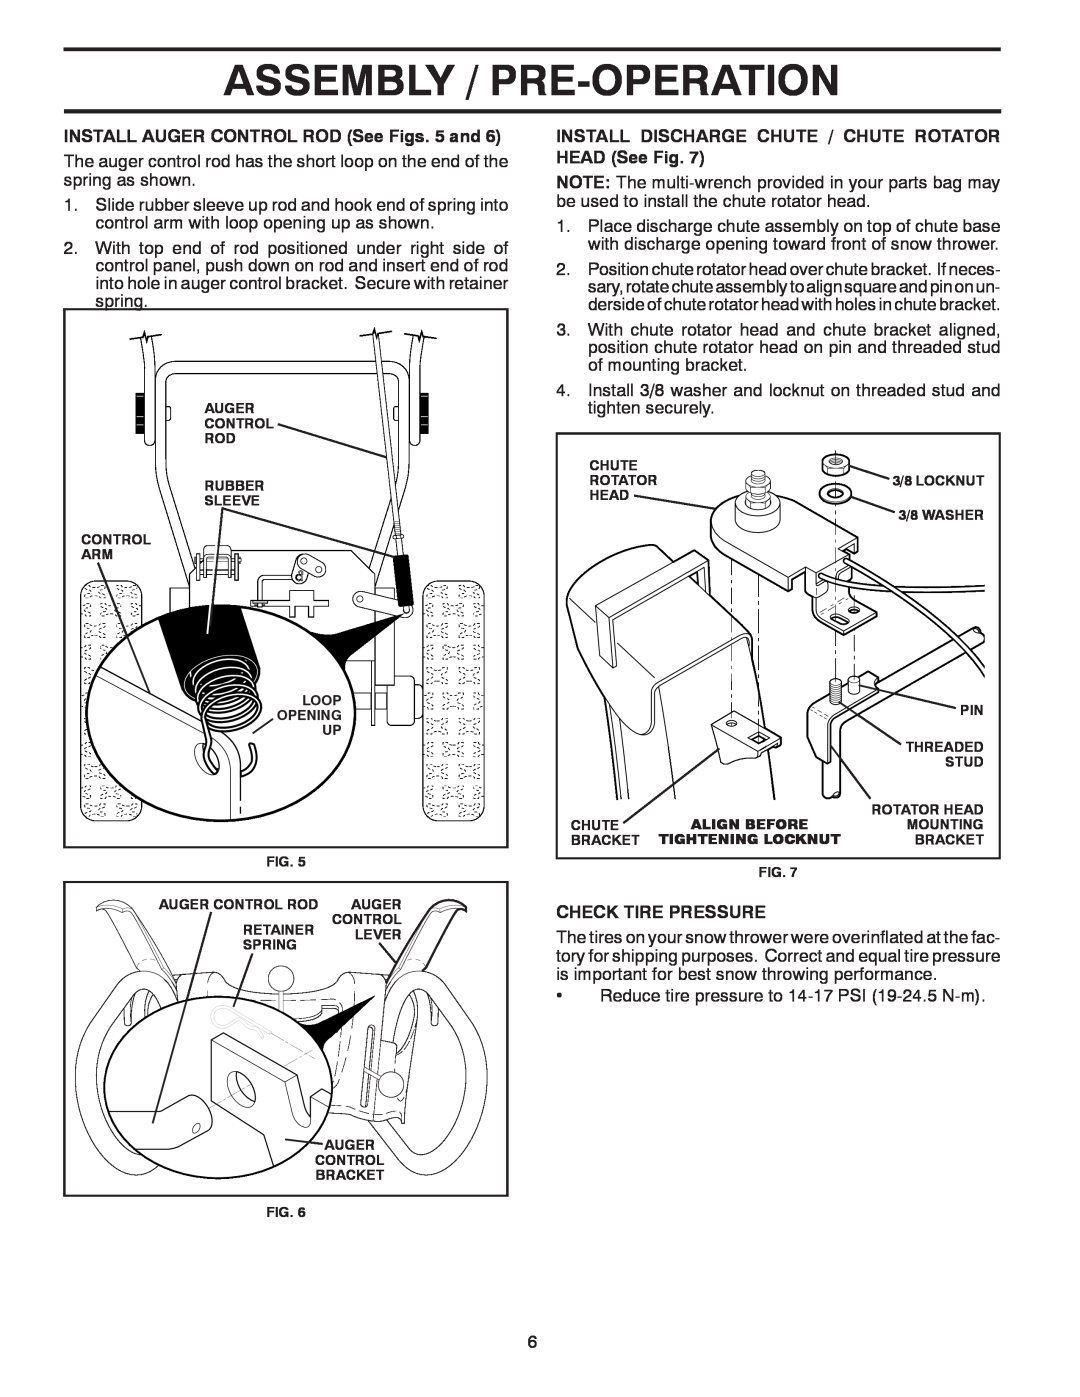 Poulan 415244, 96192001801 Assembly / Pre-Operation, INSTALL AUGER CONTROL ROD See Figs. 5 and, Check Tire Pressure 